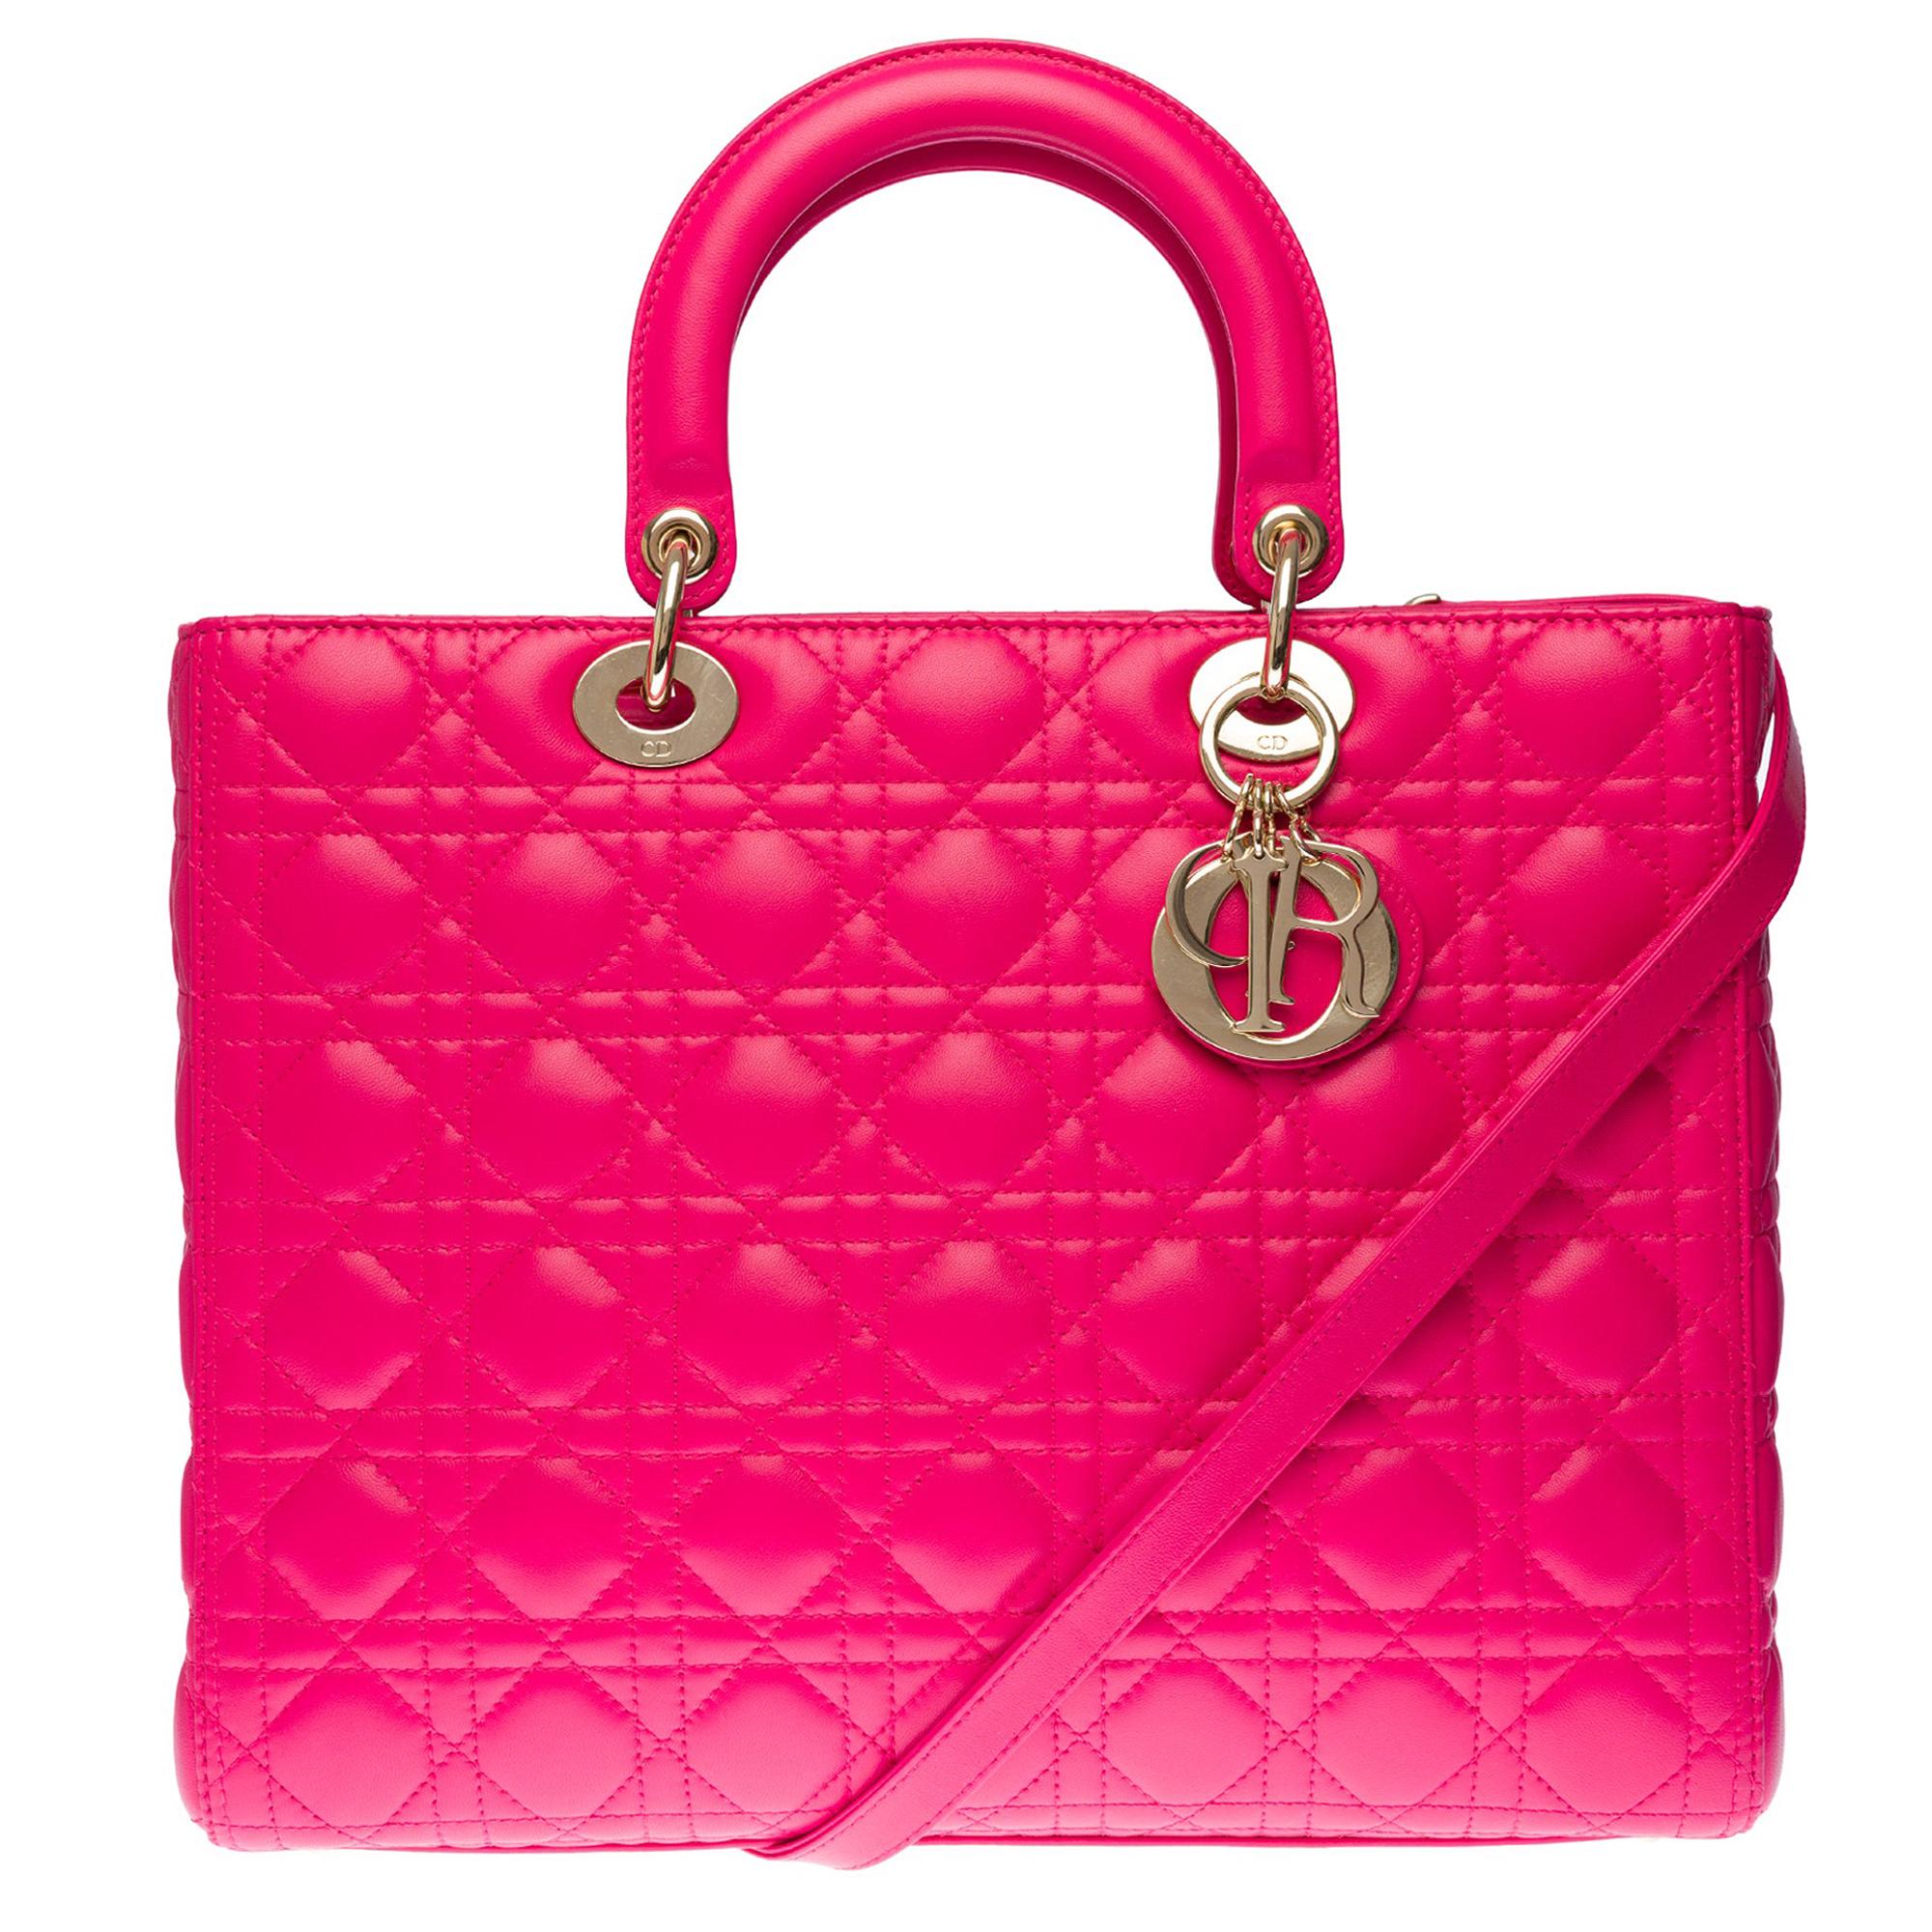 Lady Dior GM ( large size) shoulder bag with strap in Pink cannage leather, SHW